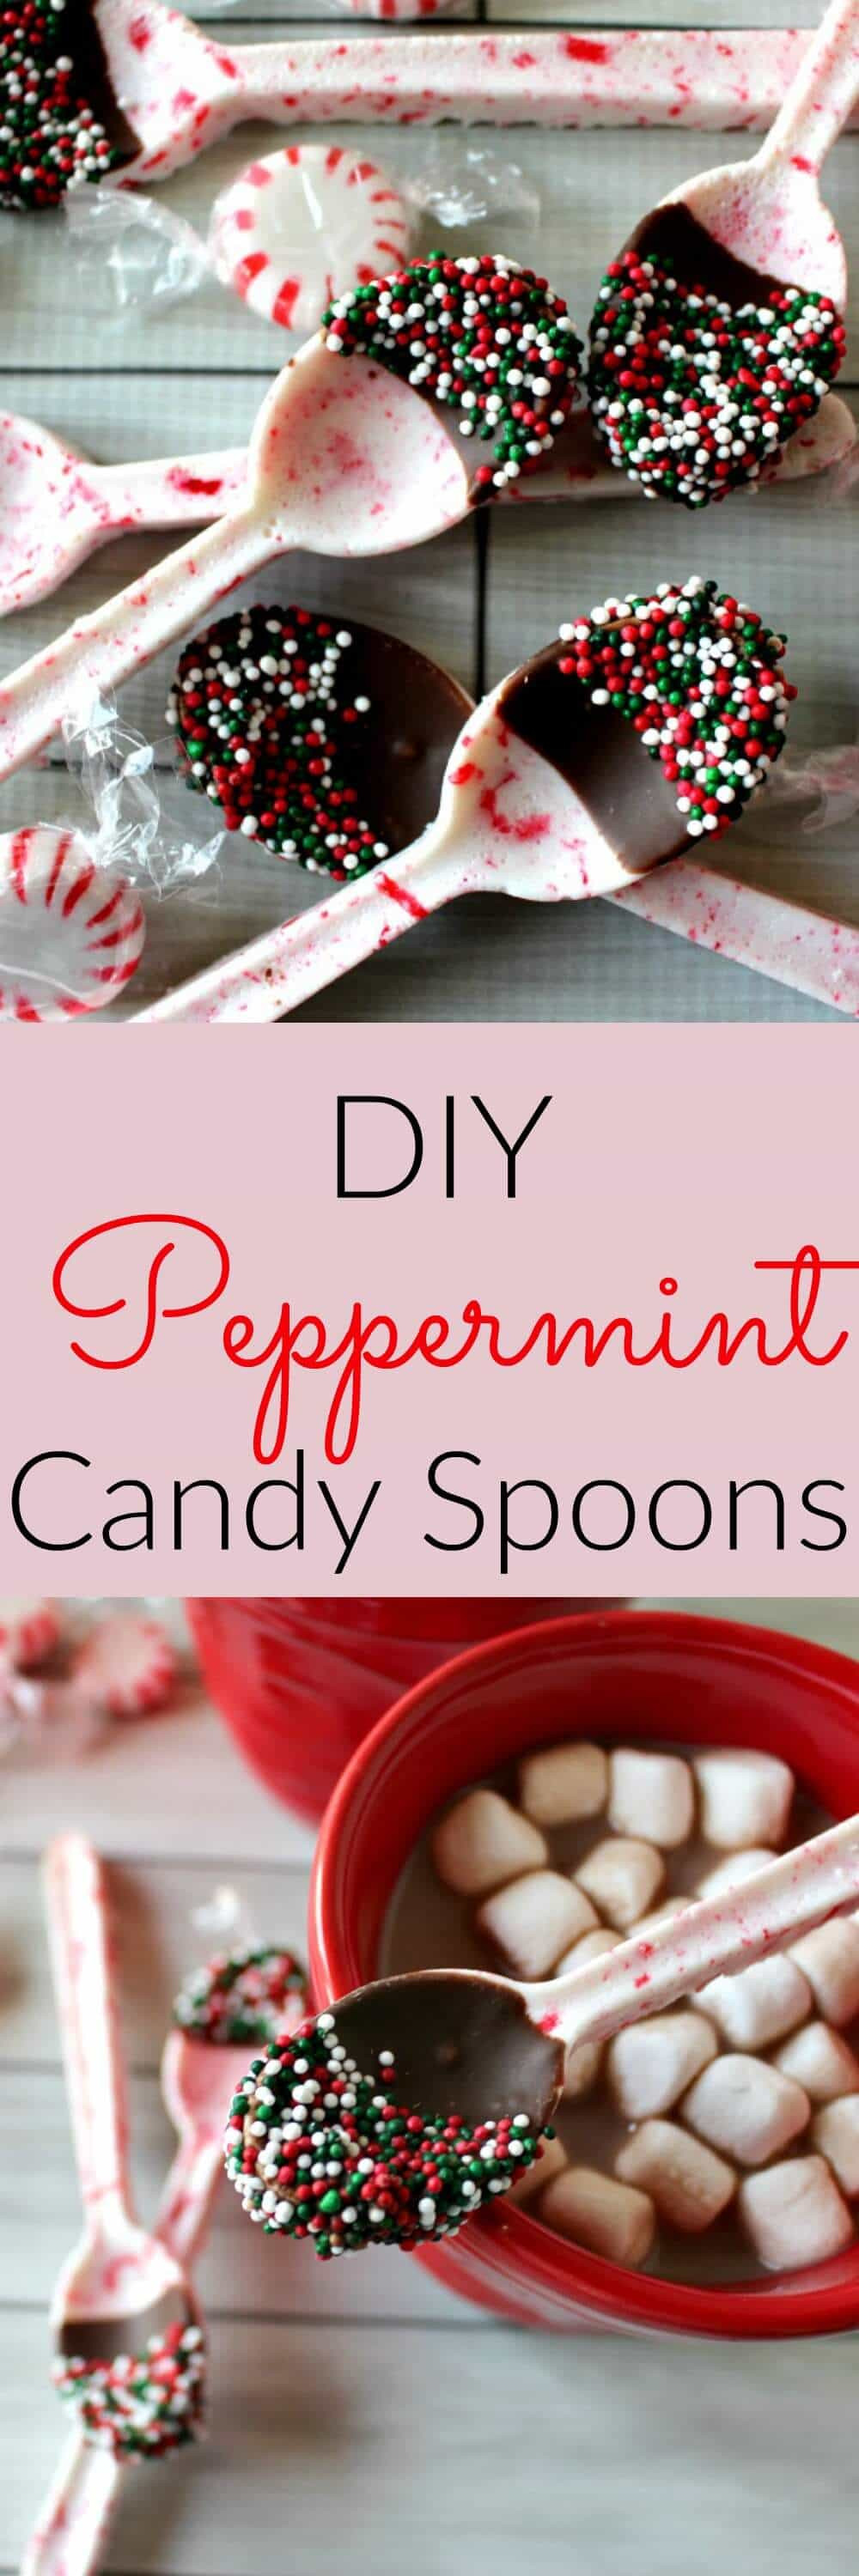 Christmas Candy Gifts
 DIY Peppermint Candy Spoons Princess Pinky Girl